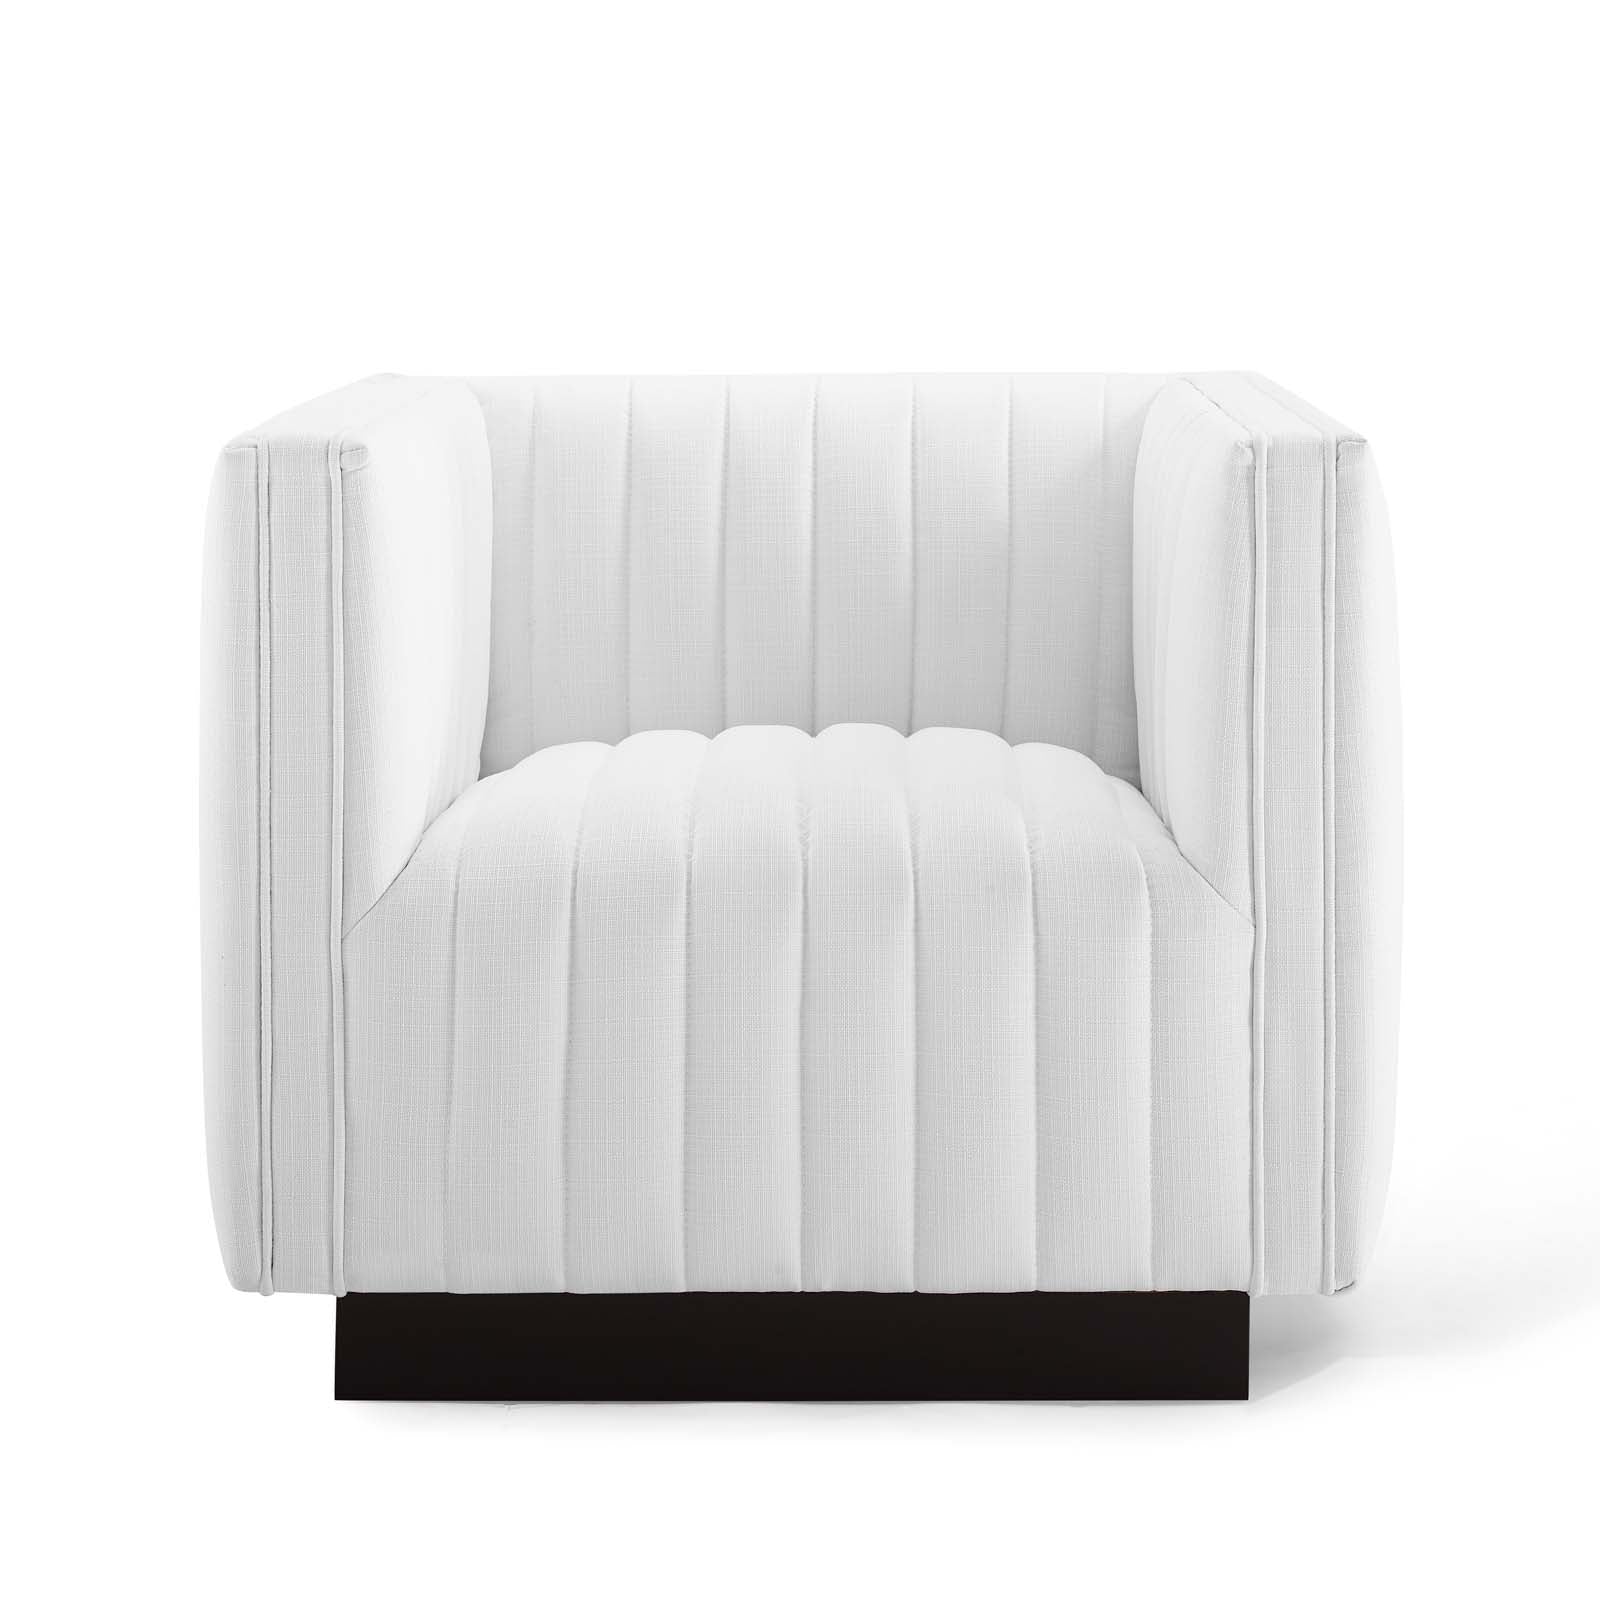 Modway Living Room Sets - Conjure Tufted Armchair Upholstered Fabric ( Set of 2 ) White